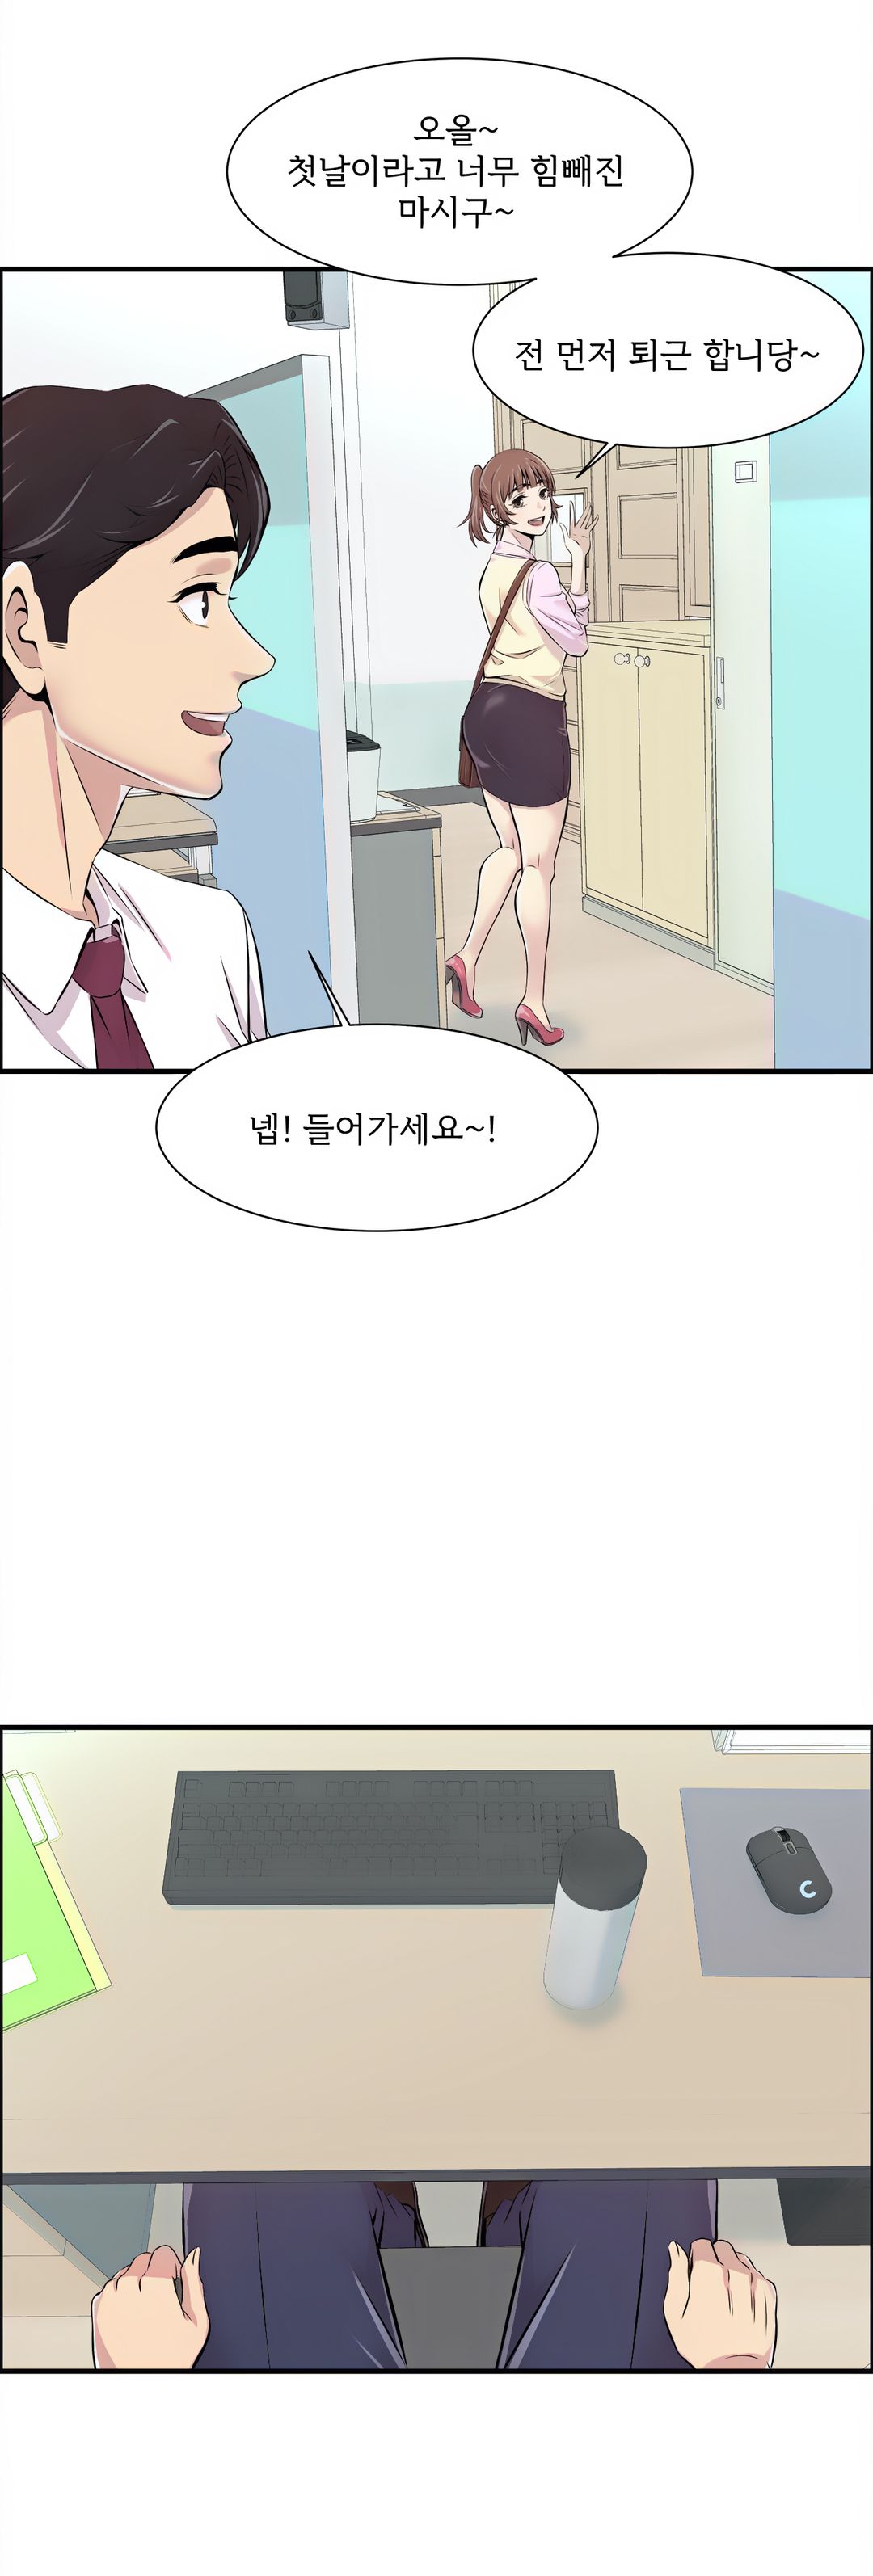 Cram School Scandal Raw - Chapter 2 Page 17